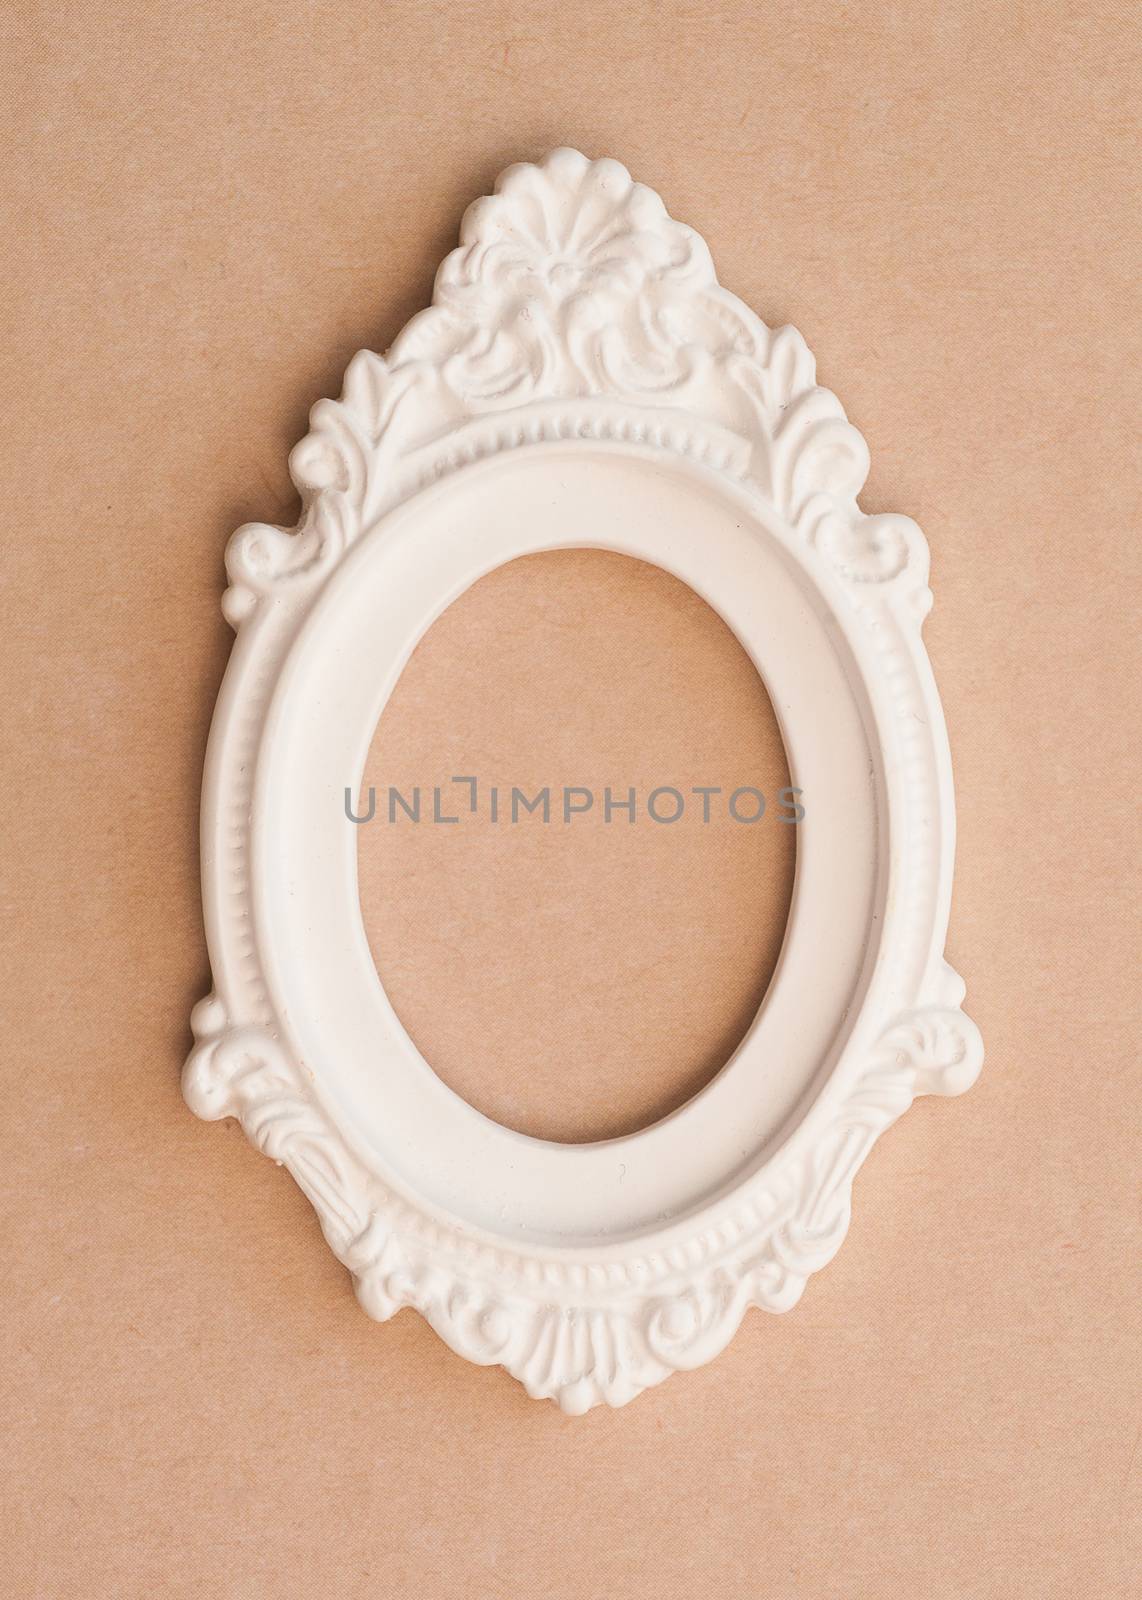 decorative vintage photo frame and place for text.